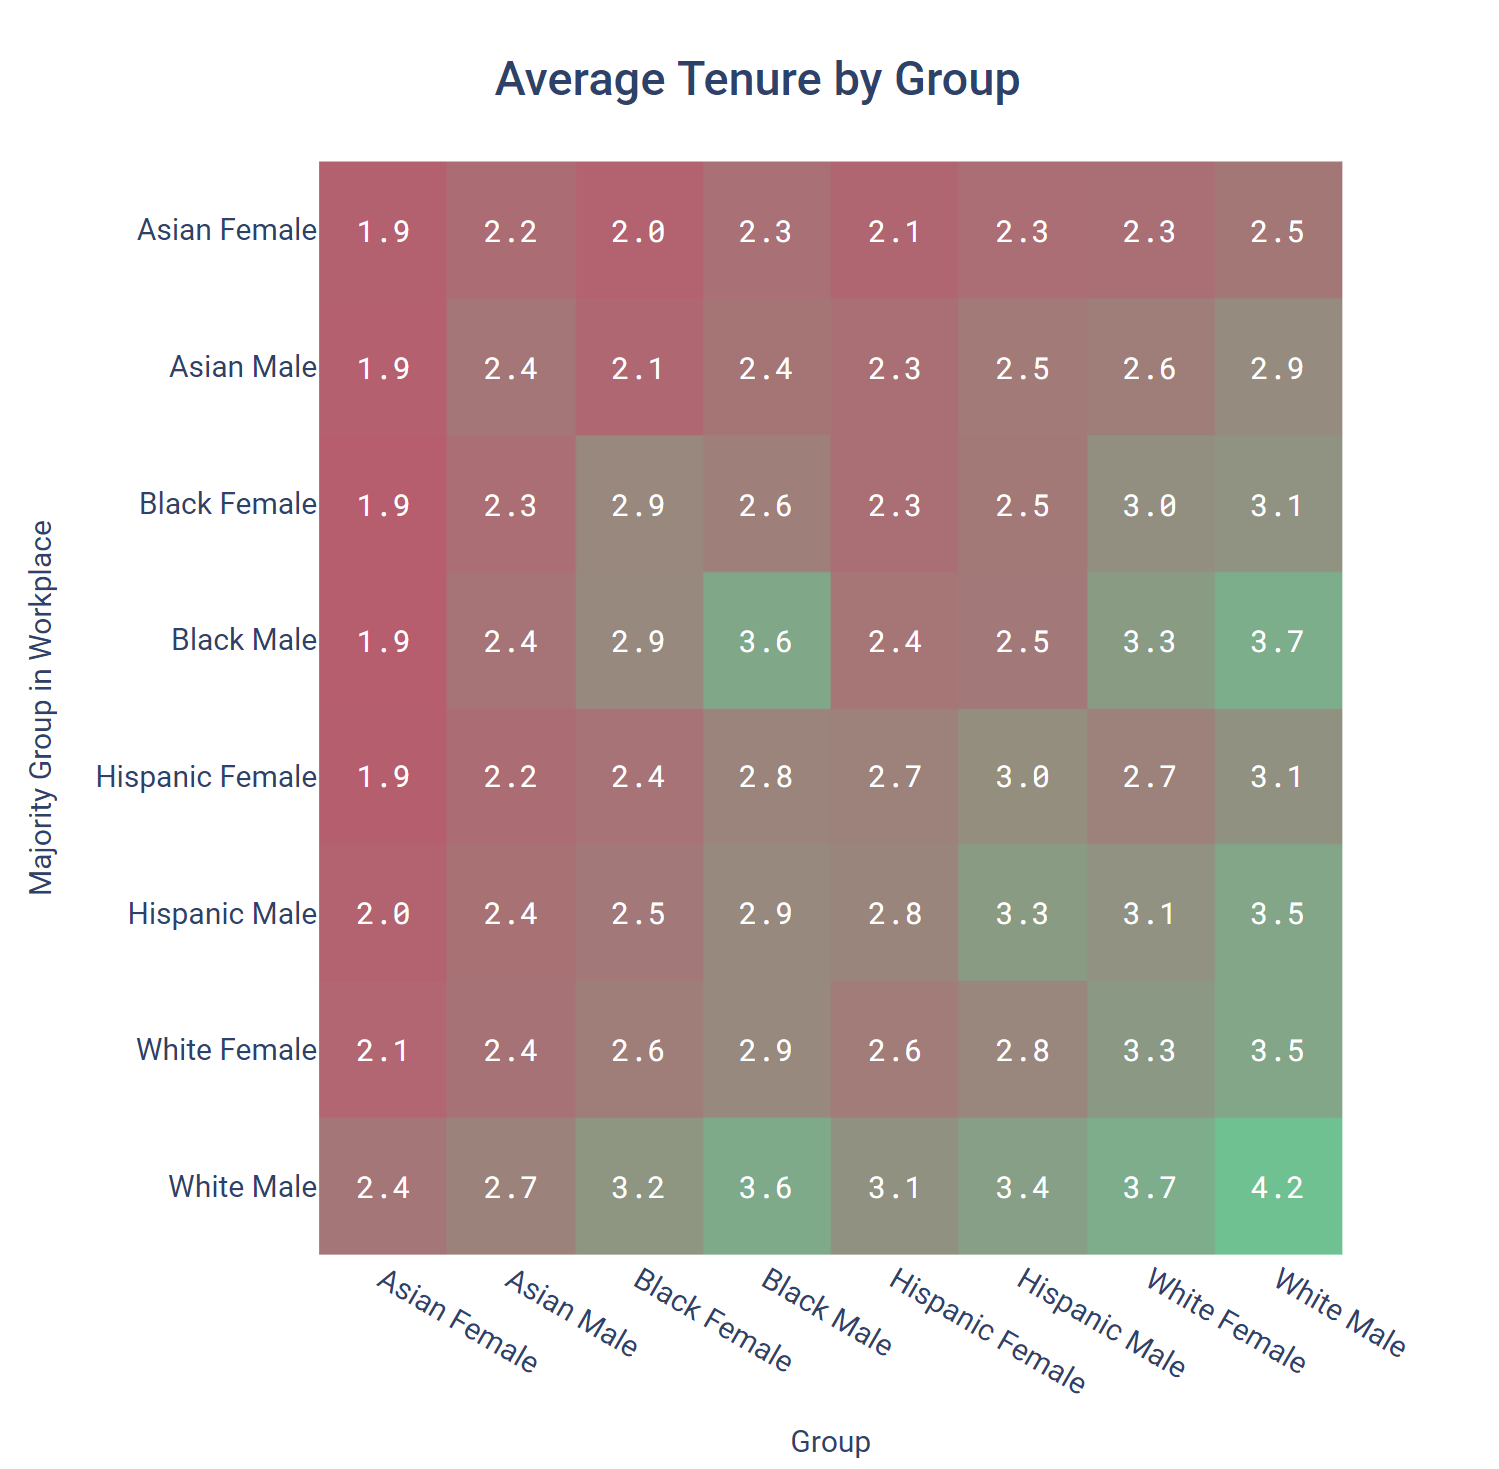 Average Tenure by Group